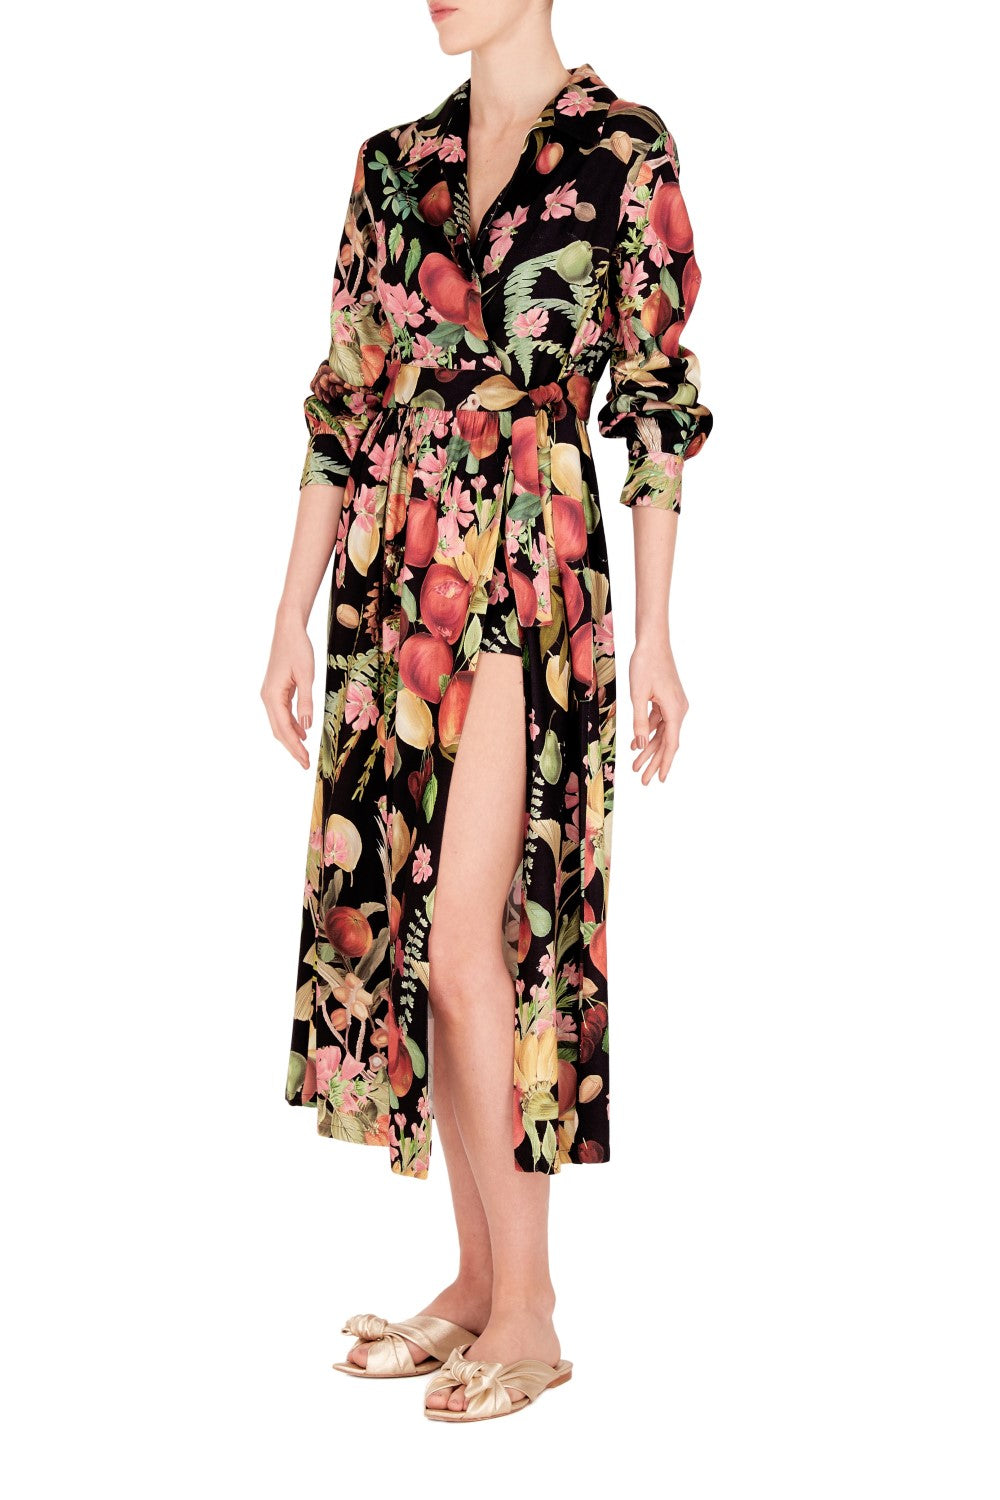 This wrap dress has a modern-meets-vintage style and is made of viscose